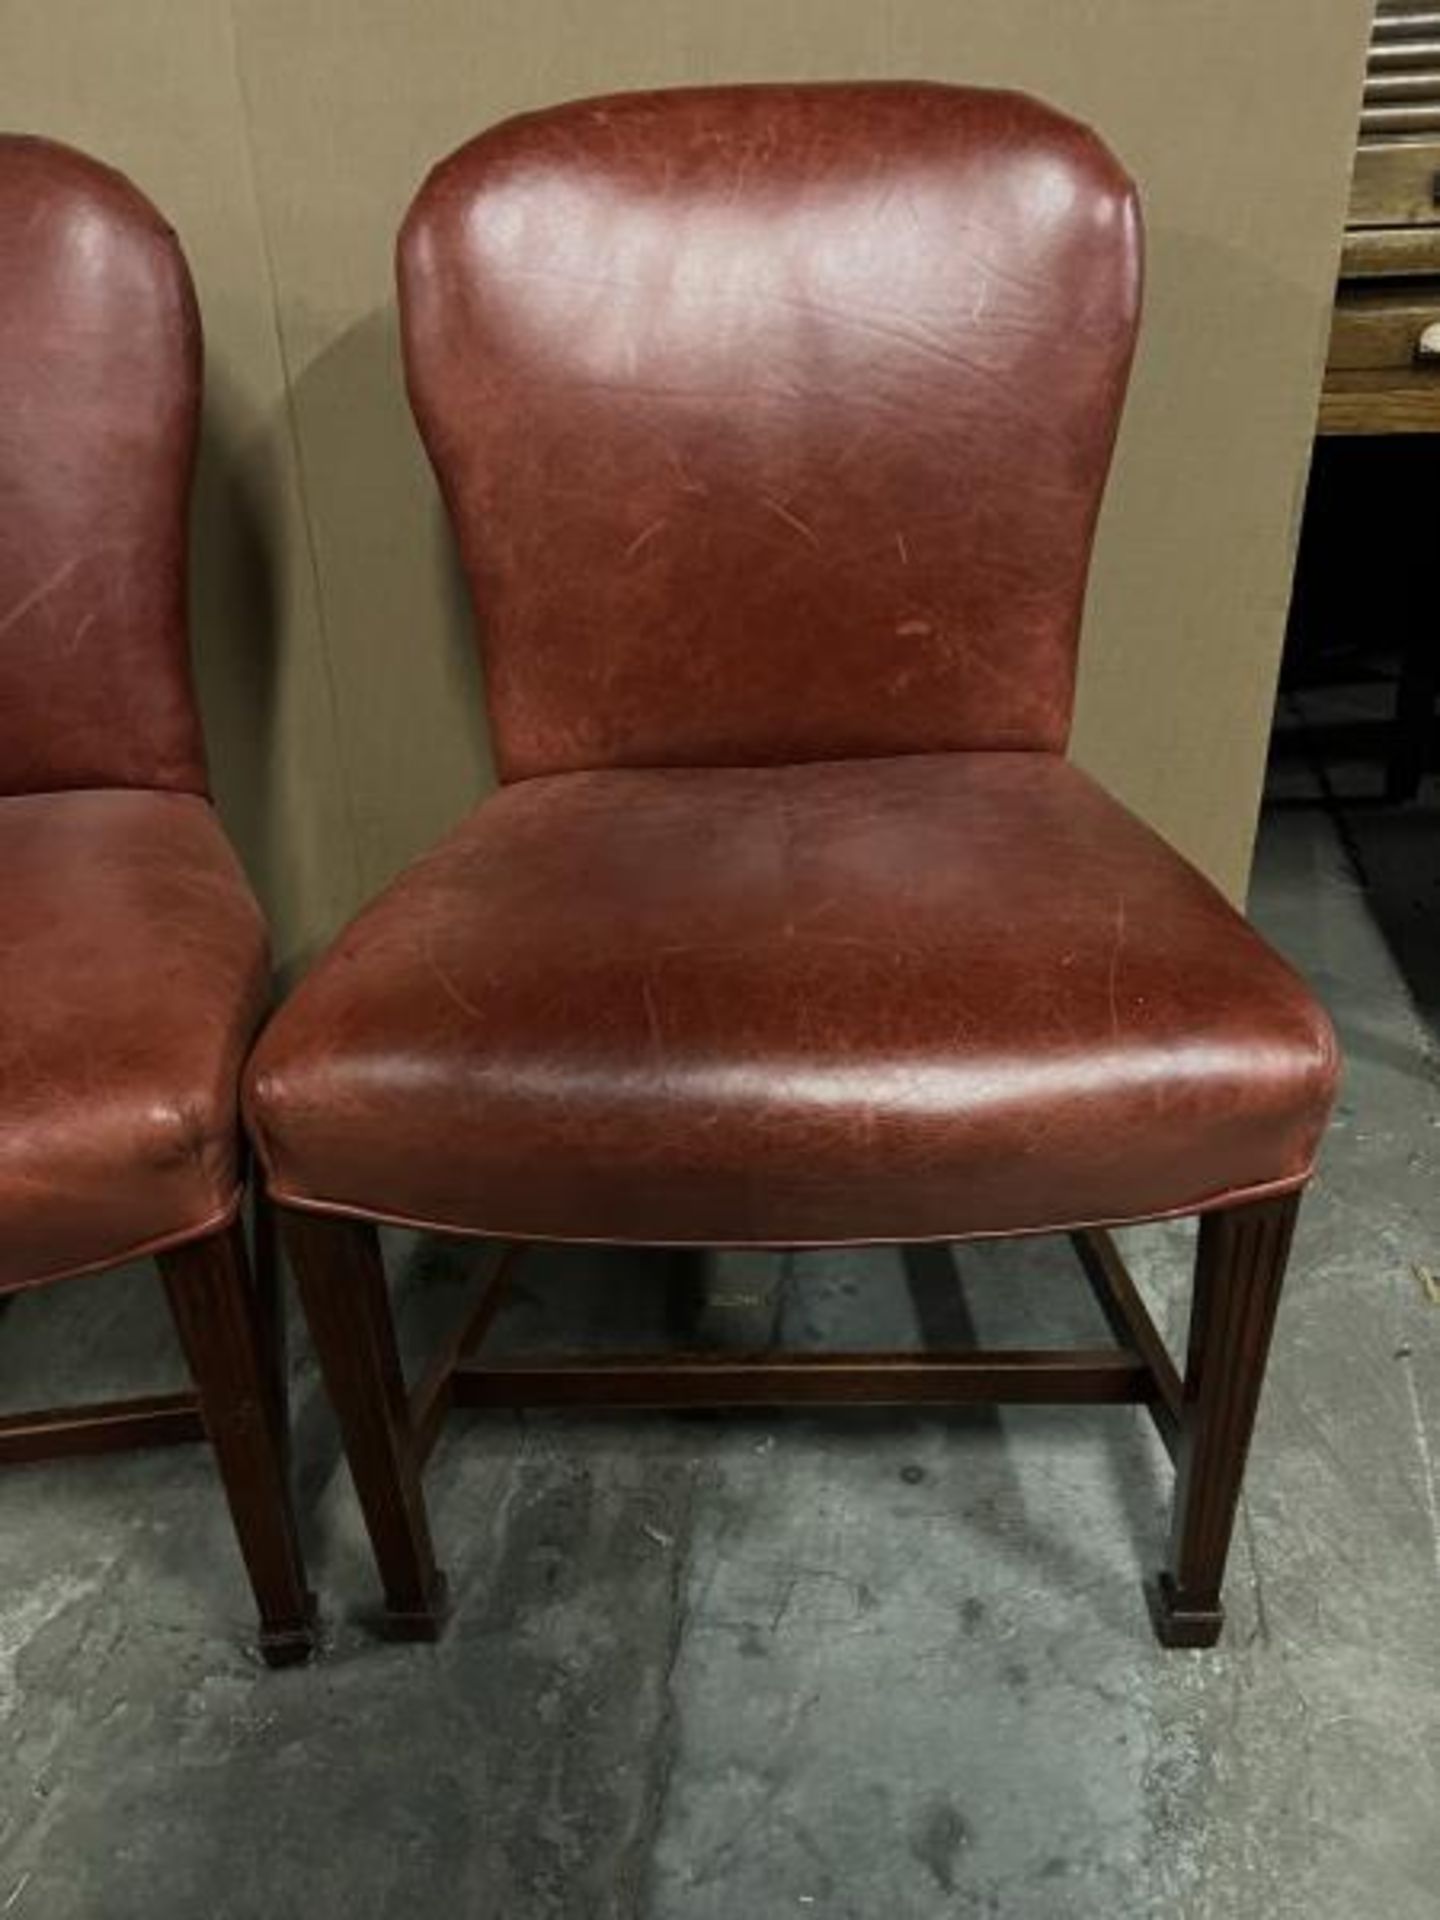 Pair of Red Vinyl Chairs; Located in Mill Building - Image 5 of 20